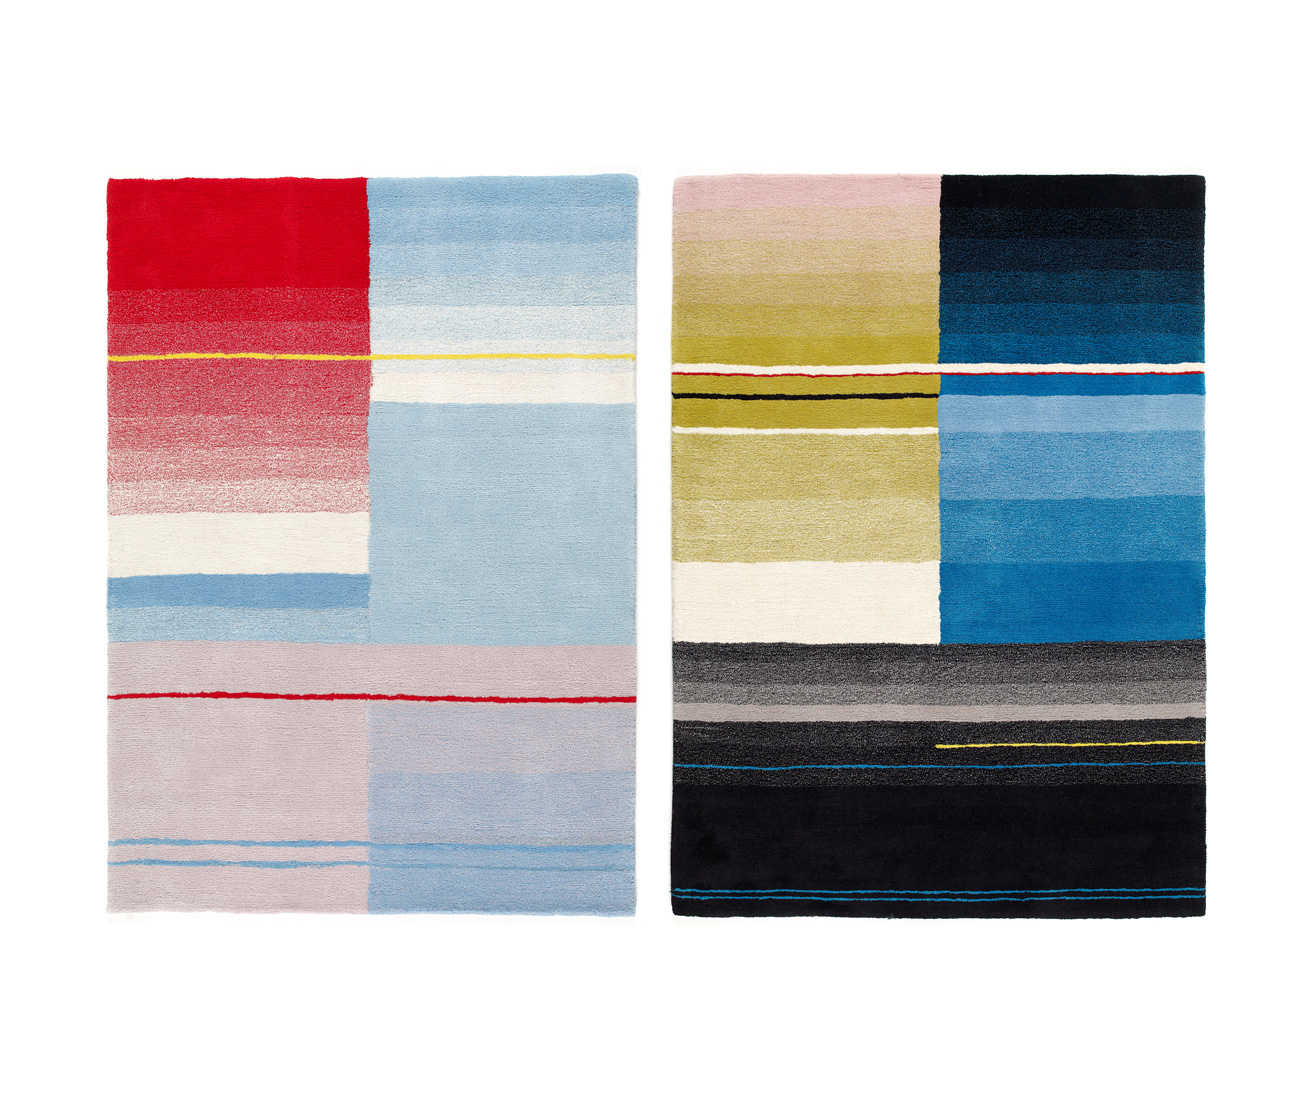 Hay's Colour Rugs Mimic Sunrise and Sunset